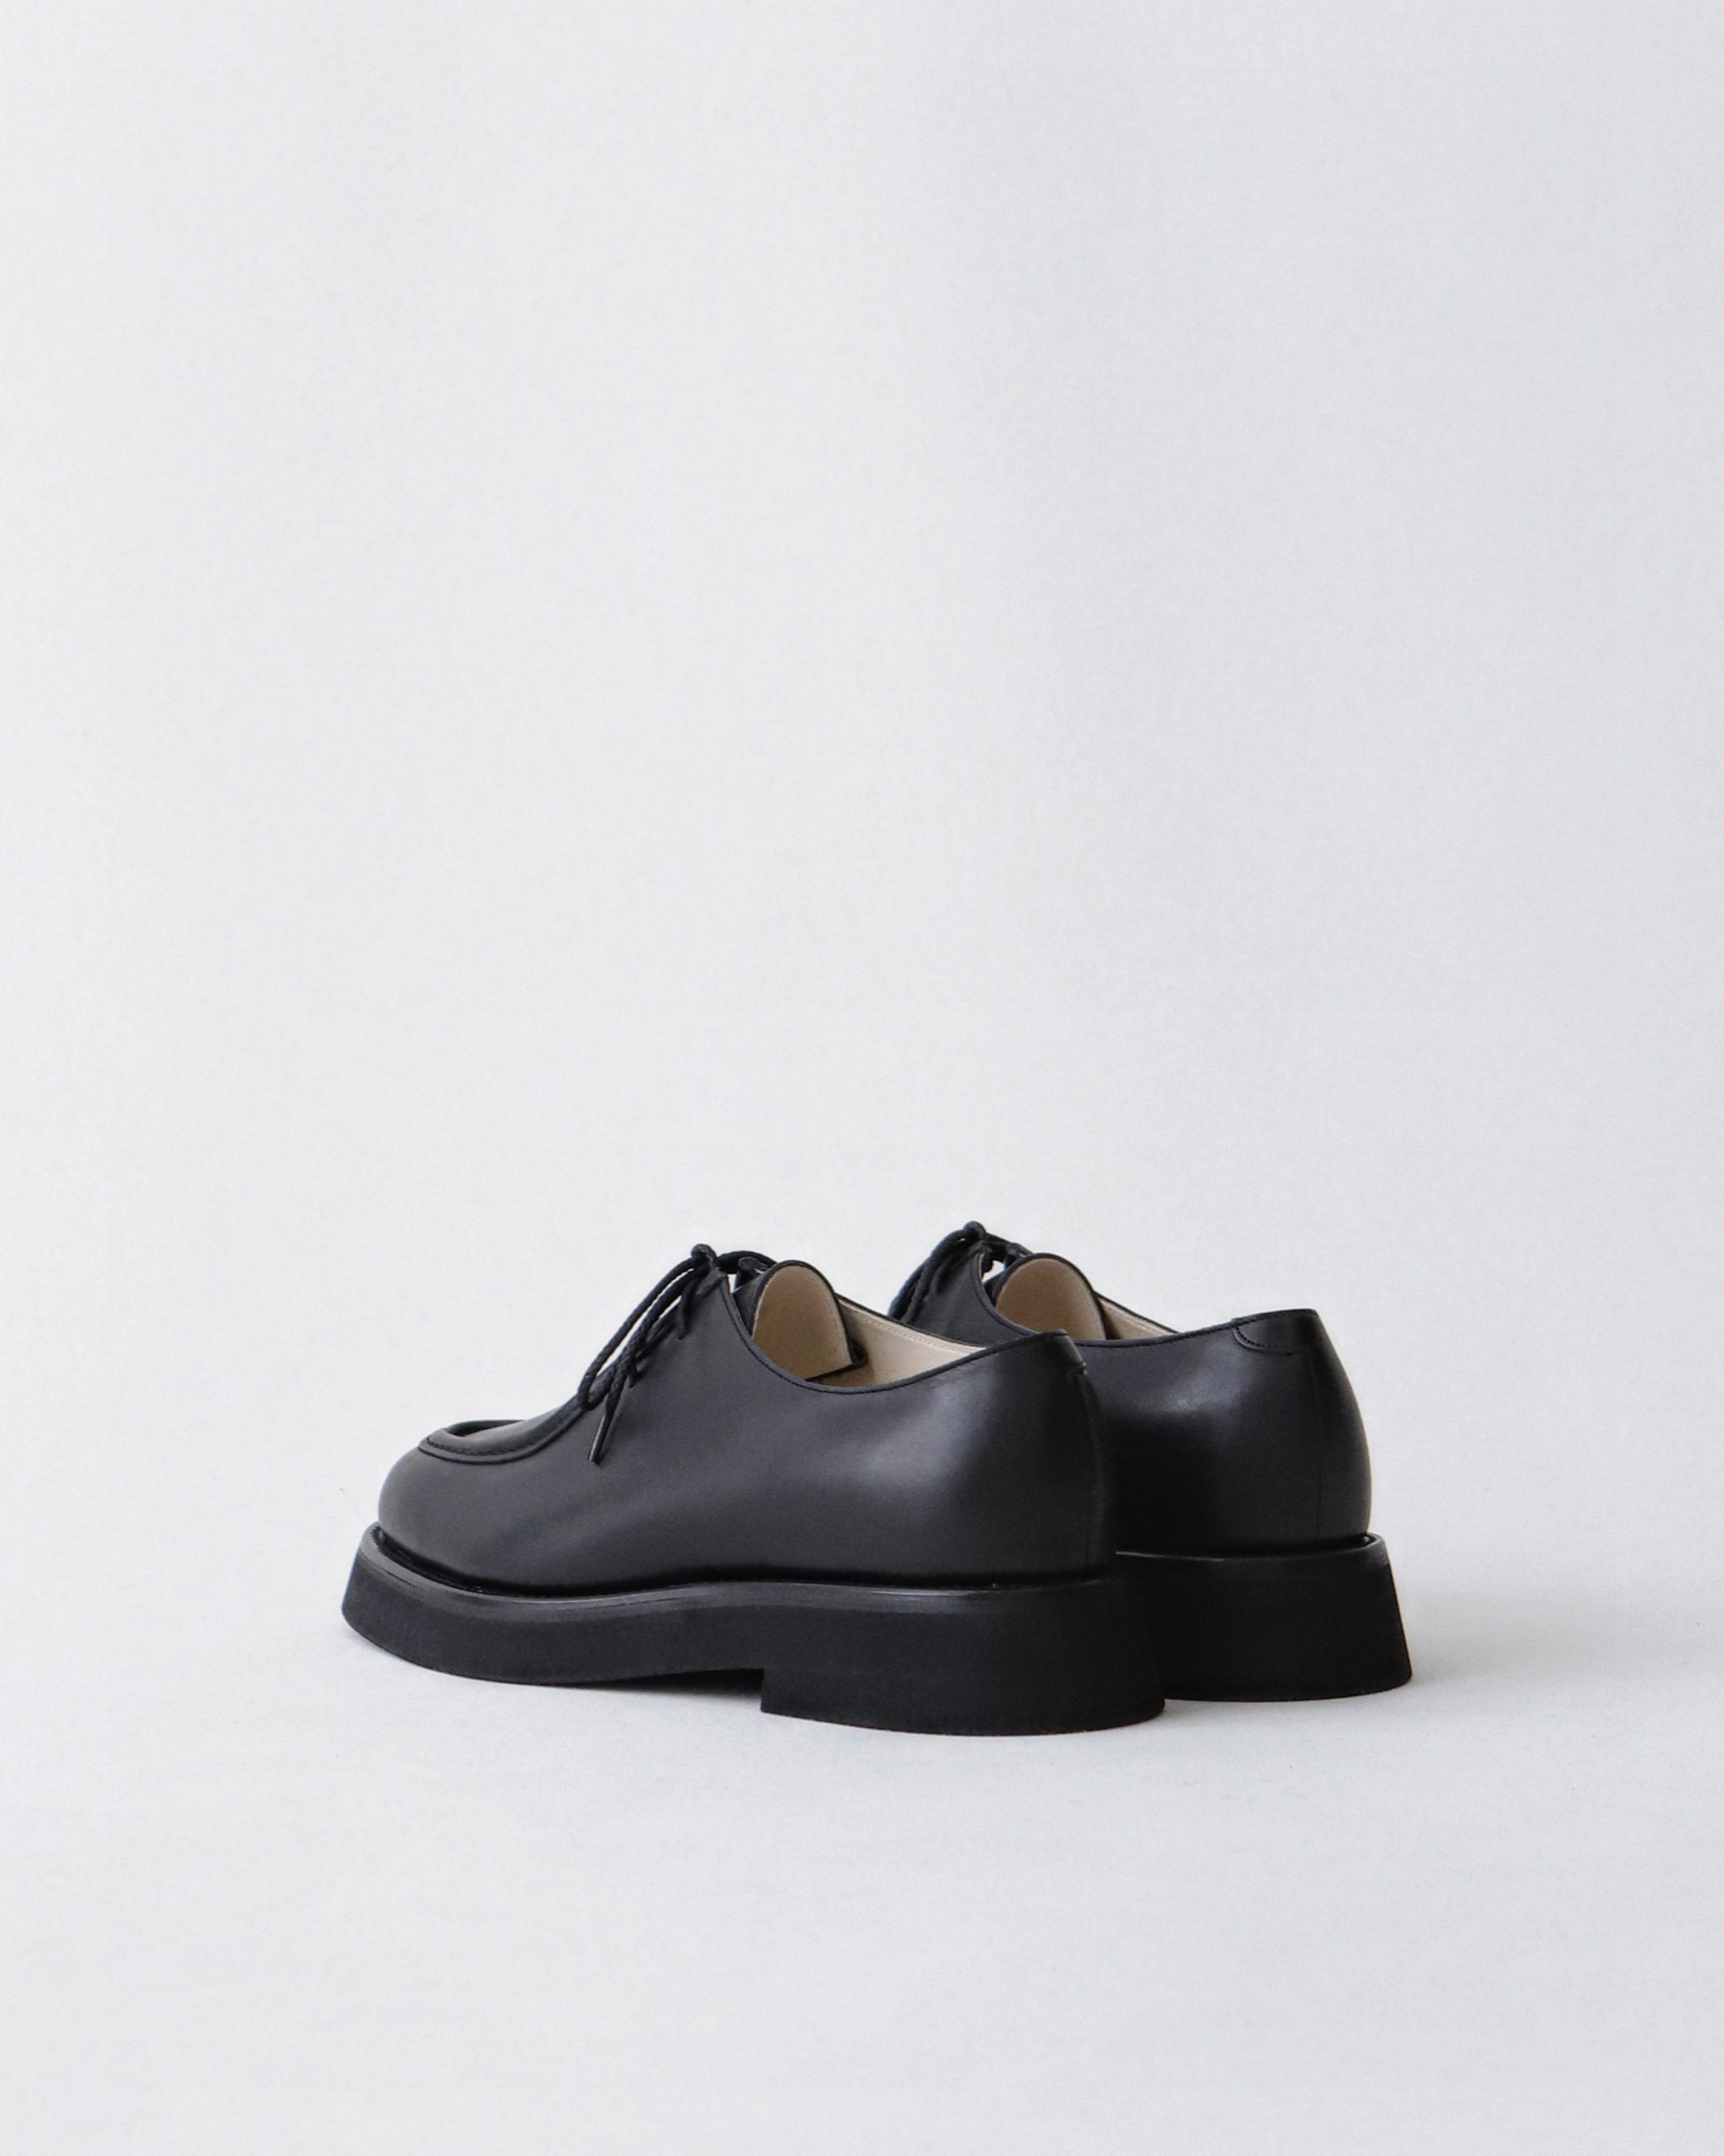 foot the coacher TIROLEAN SHOES（HARDNESS 60 SOLE） – NCNR WEB STORE